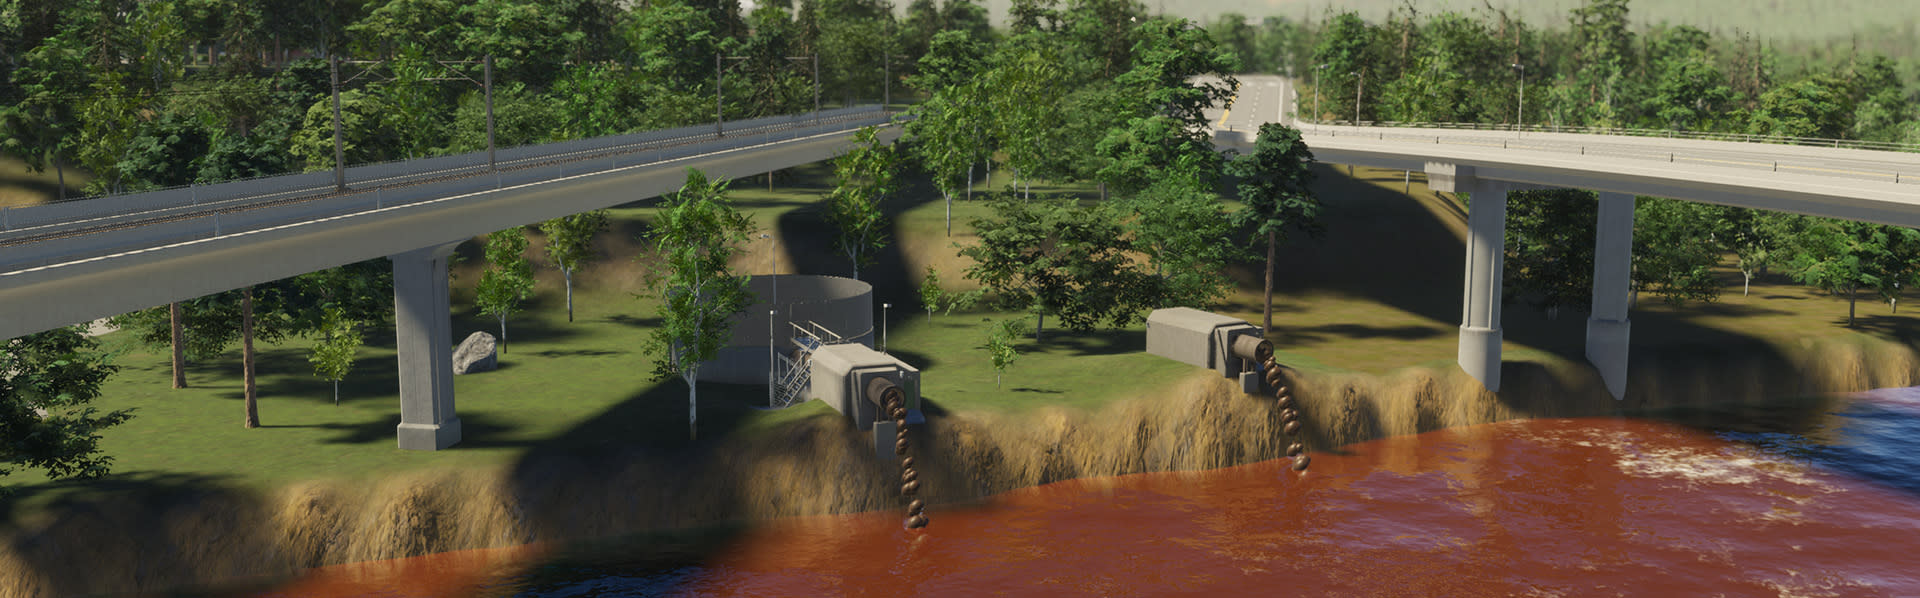 cities-skylines-ii-feature-6-24 Sewage outlet